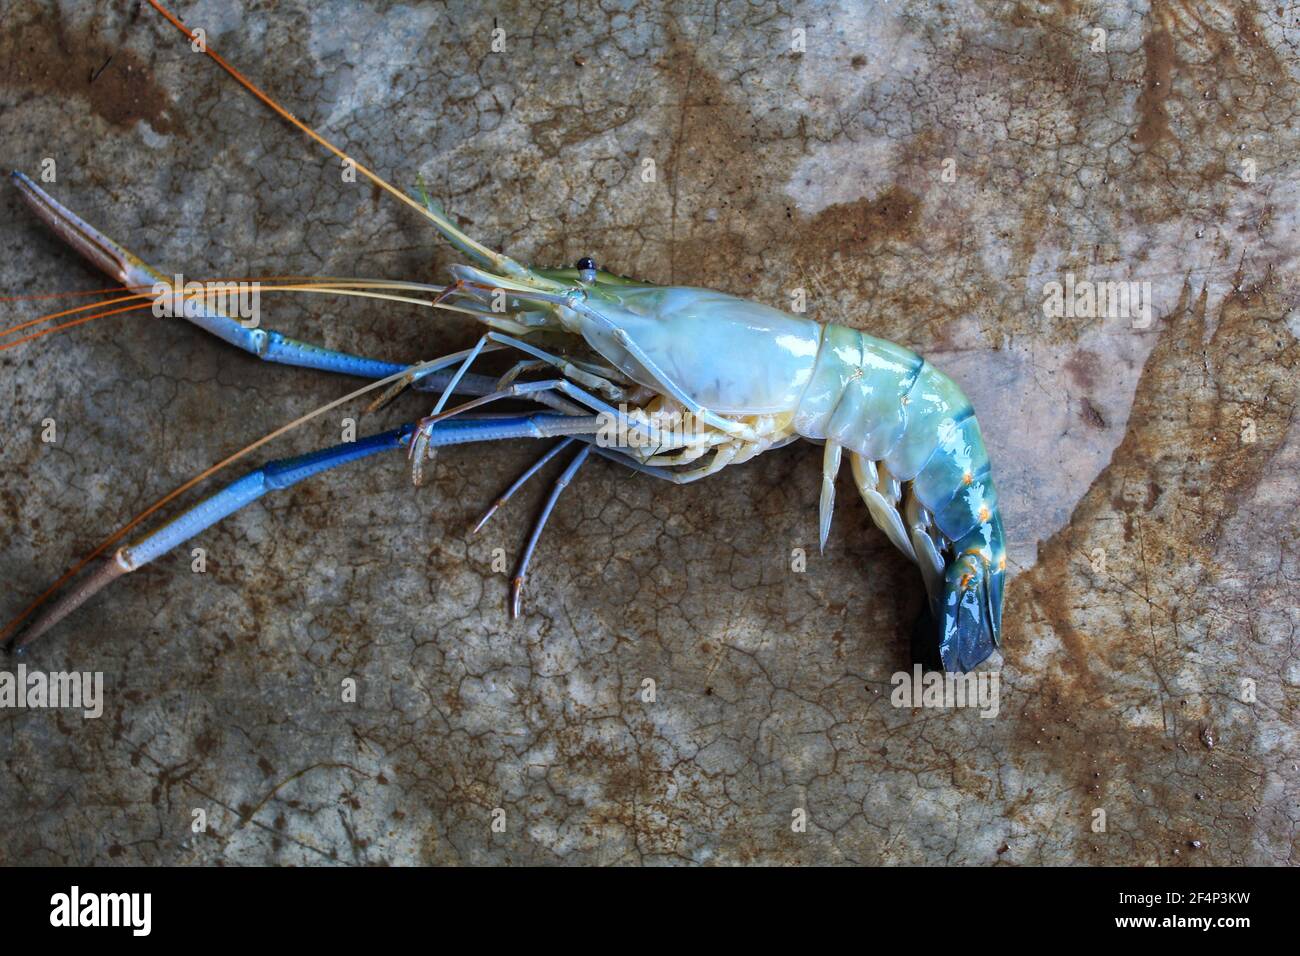 Fresh water giant river prawn sale in market scampi sale in indian